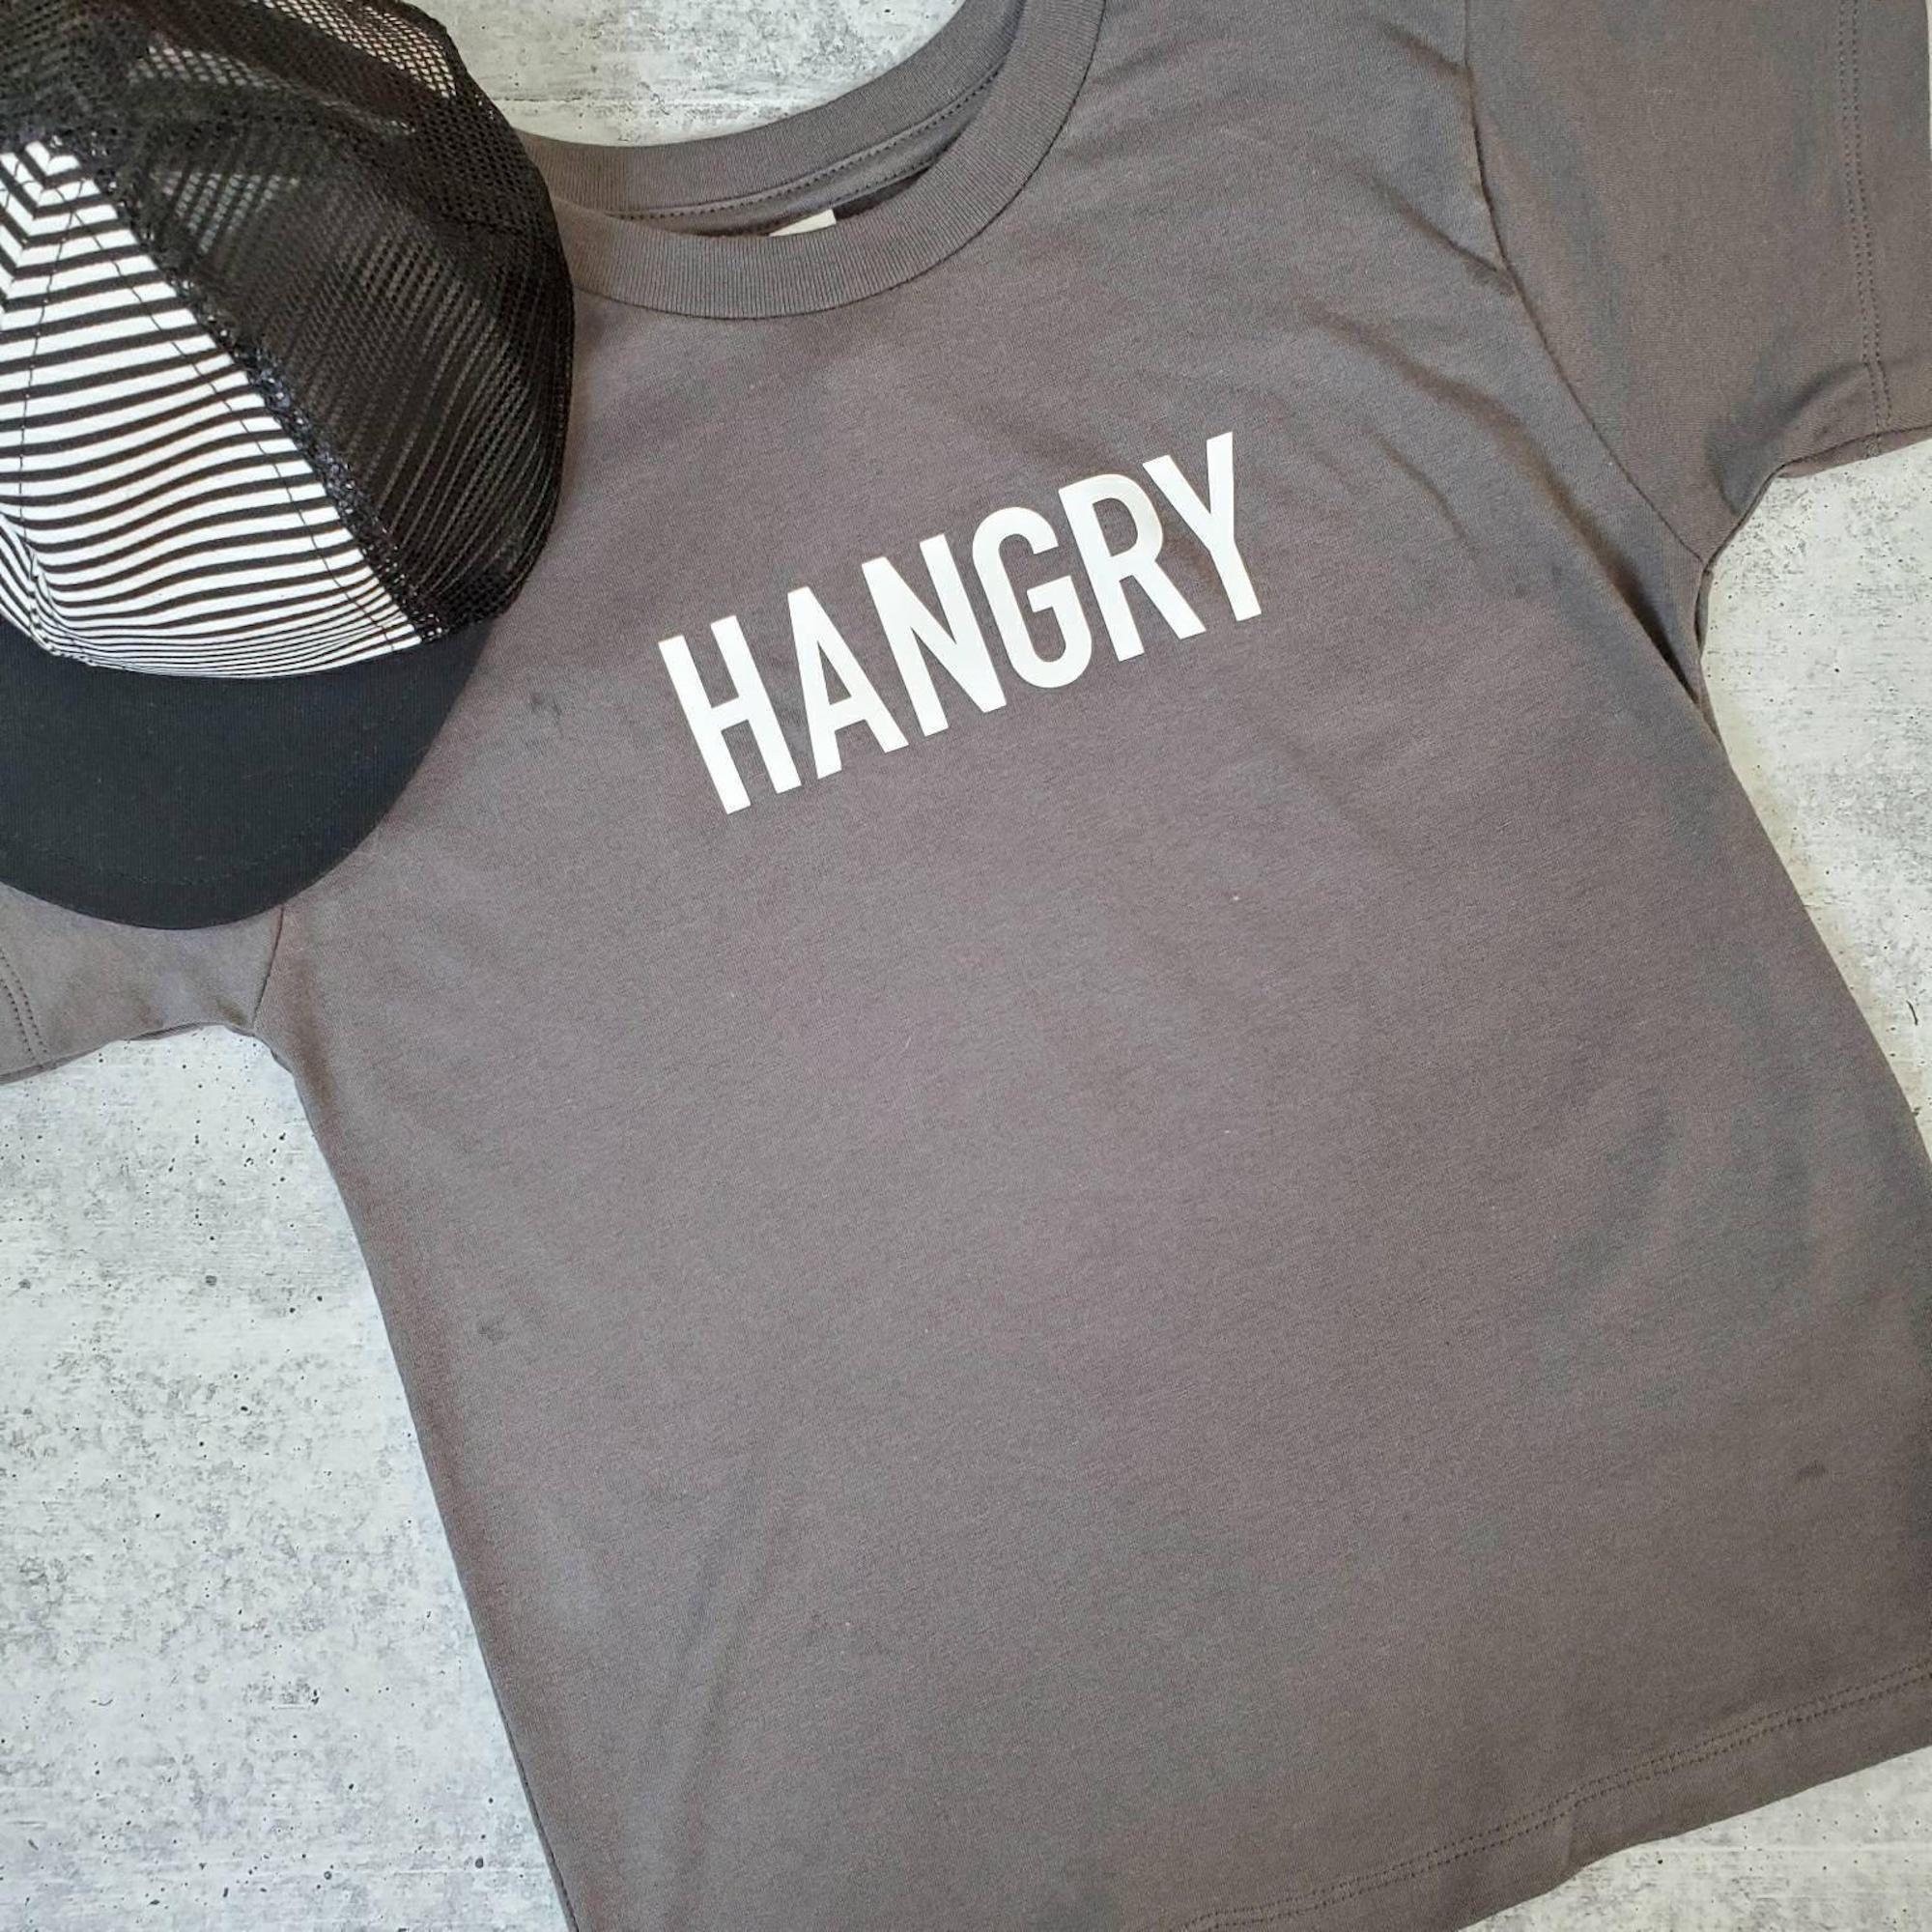 HANGRY Toddler T-Shirt OR Baby Bodysuit Salt and Sparkle